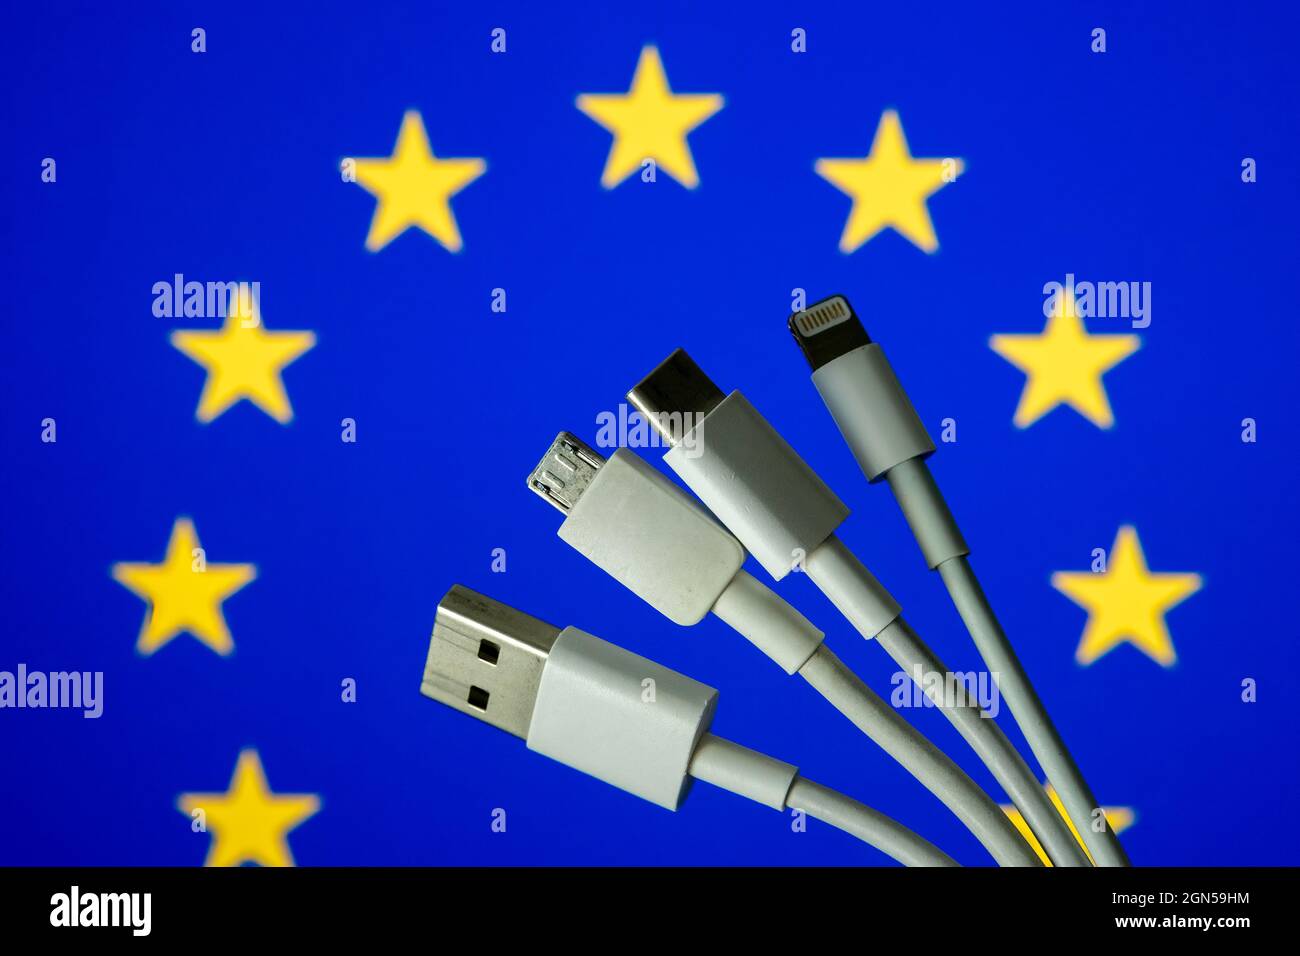 EU flag and different charging cables such as USB, USB-C, Micro USB, lightning cable. Concept for new EU universal charging cable legislation. Stock Photo